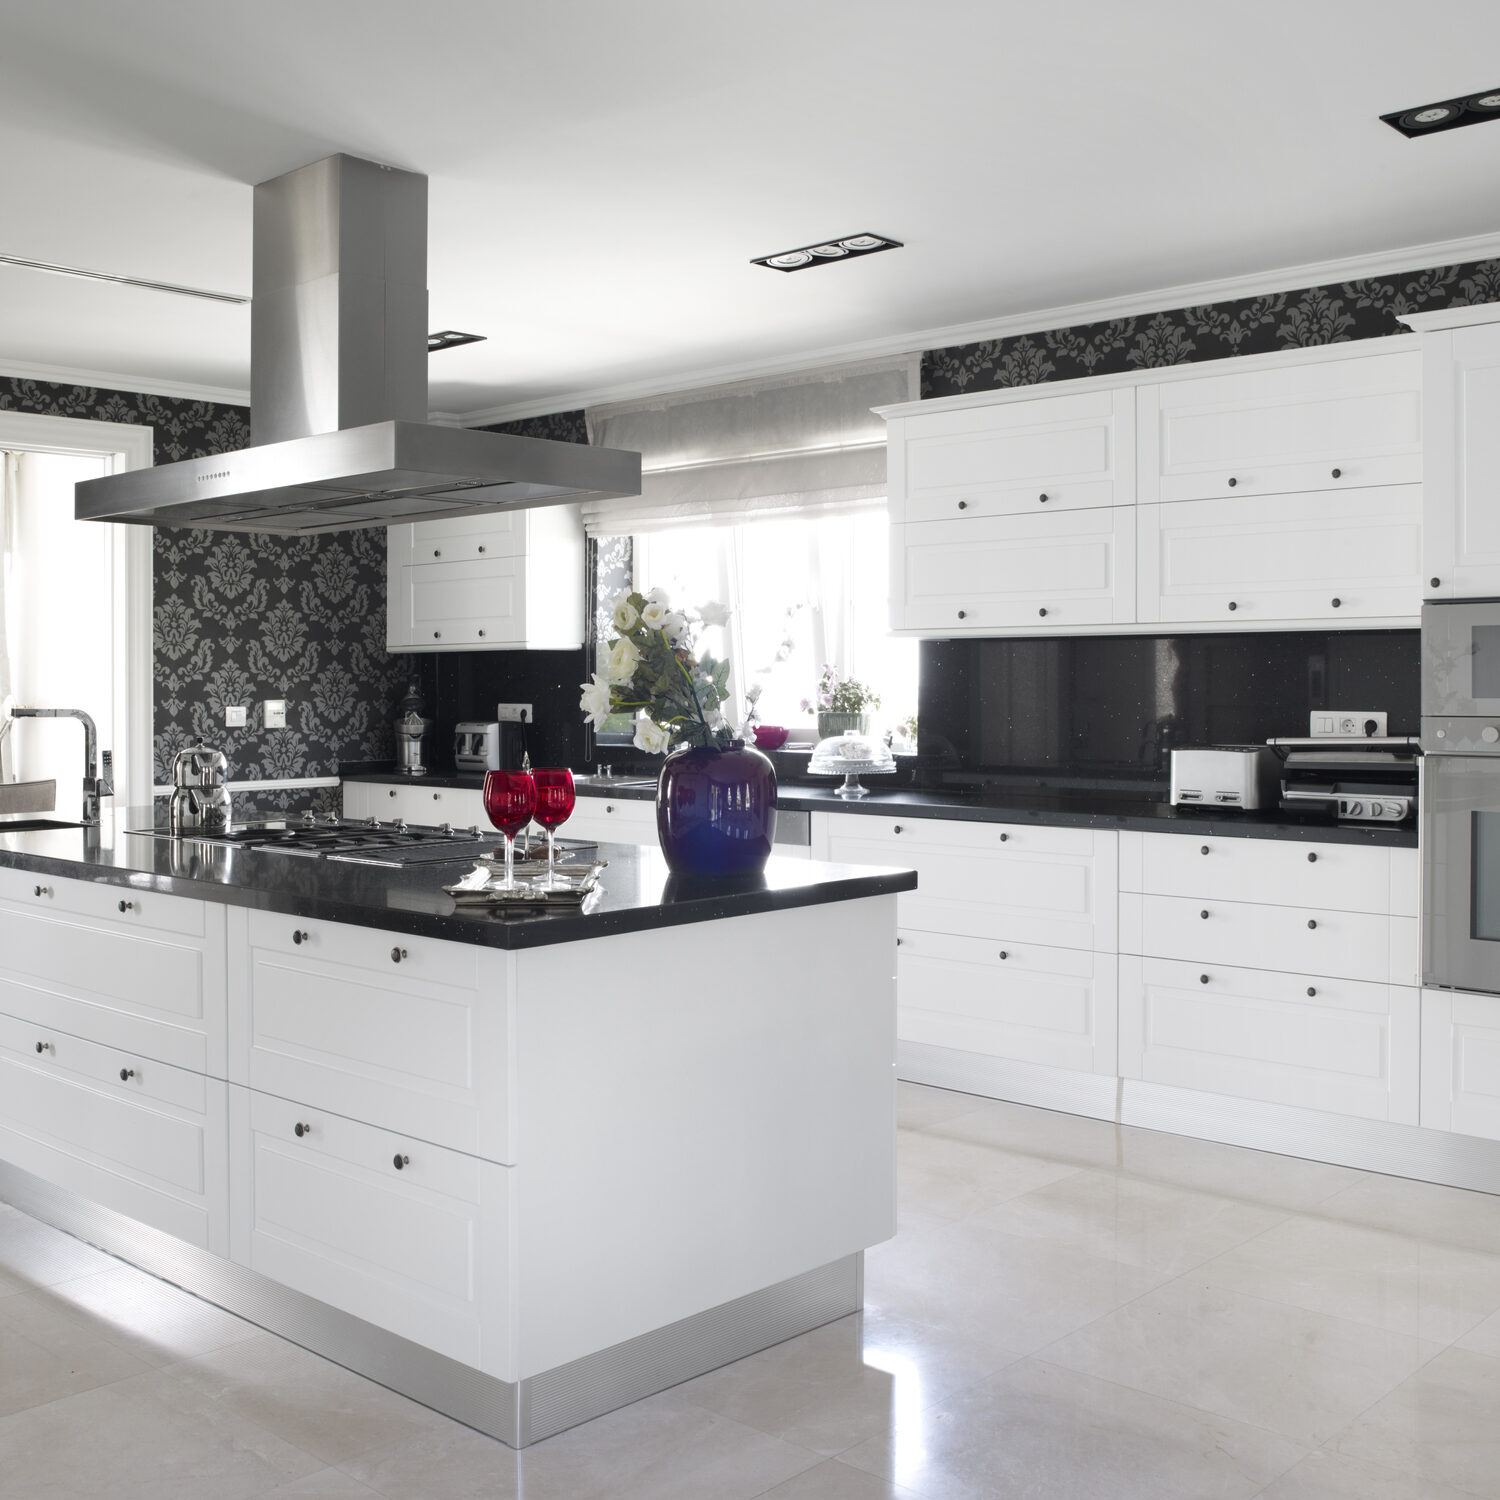 Domestic modern kitchenPlease see some similar pictures from my portfolio: